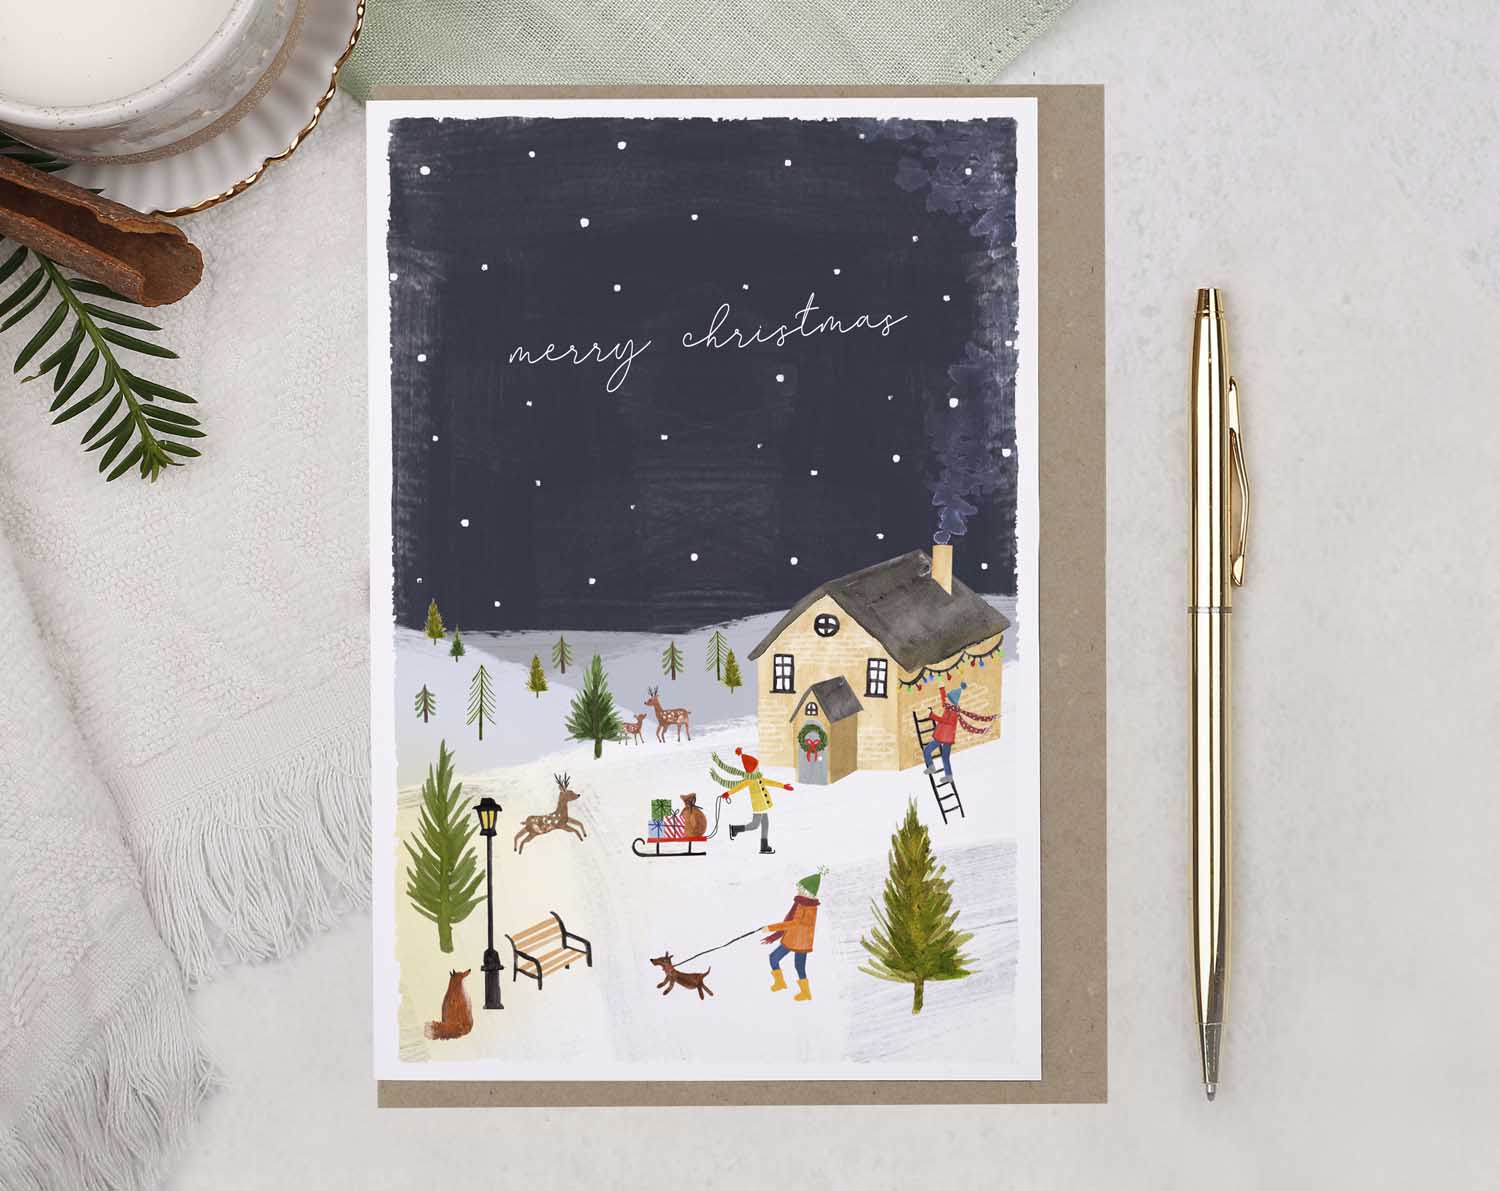 Snow Cottage Merry Christmas Card